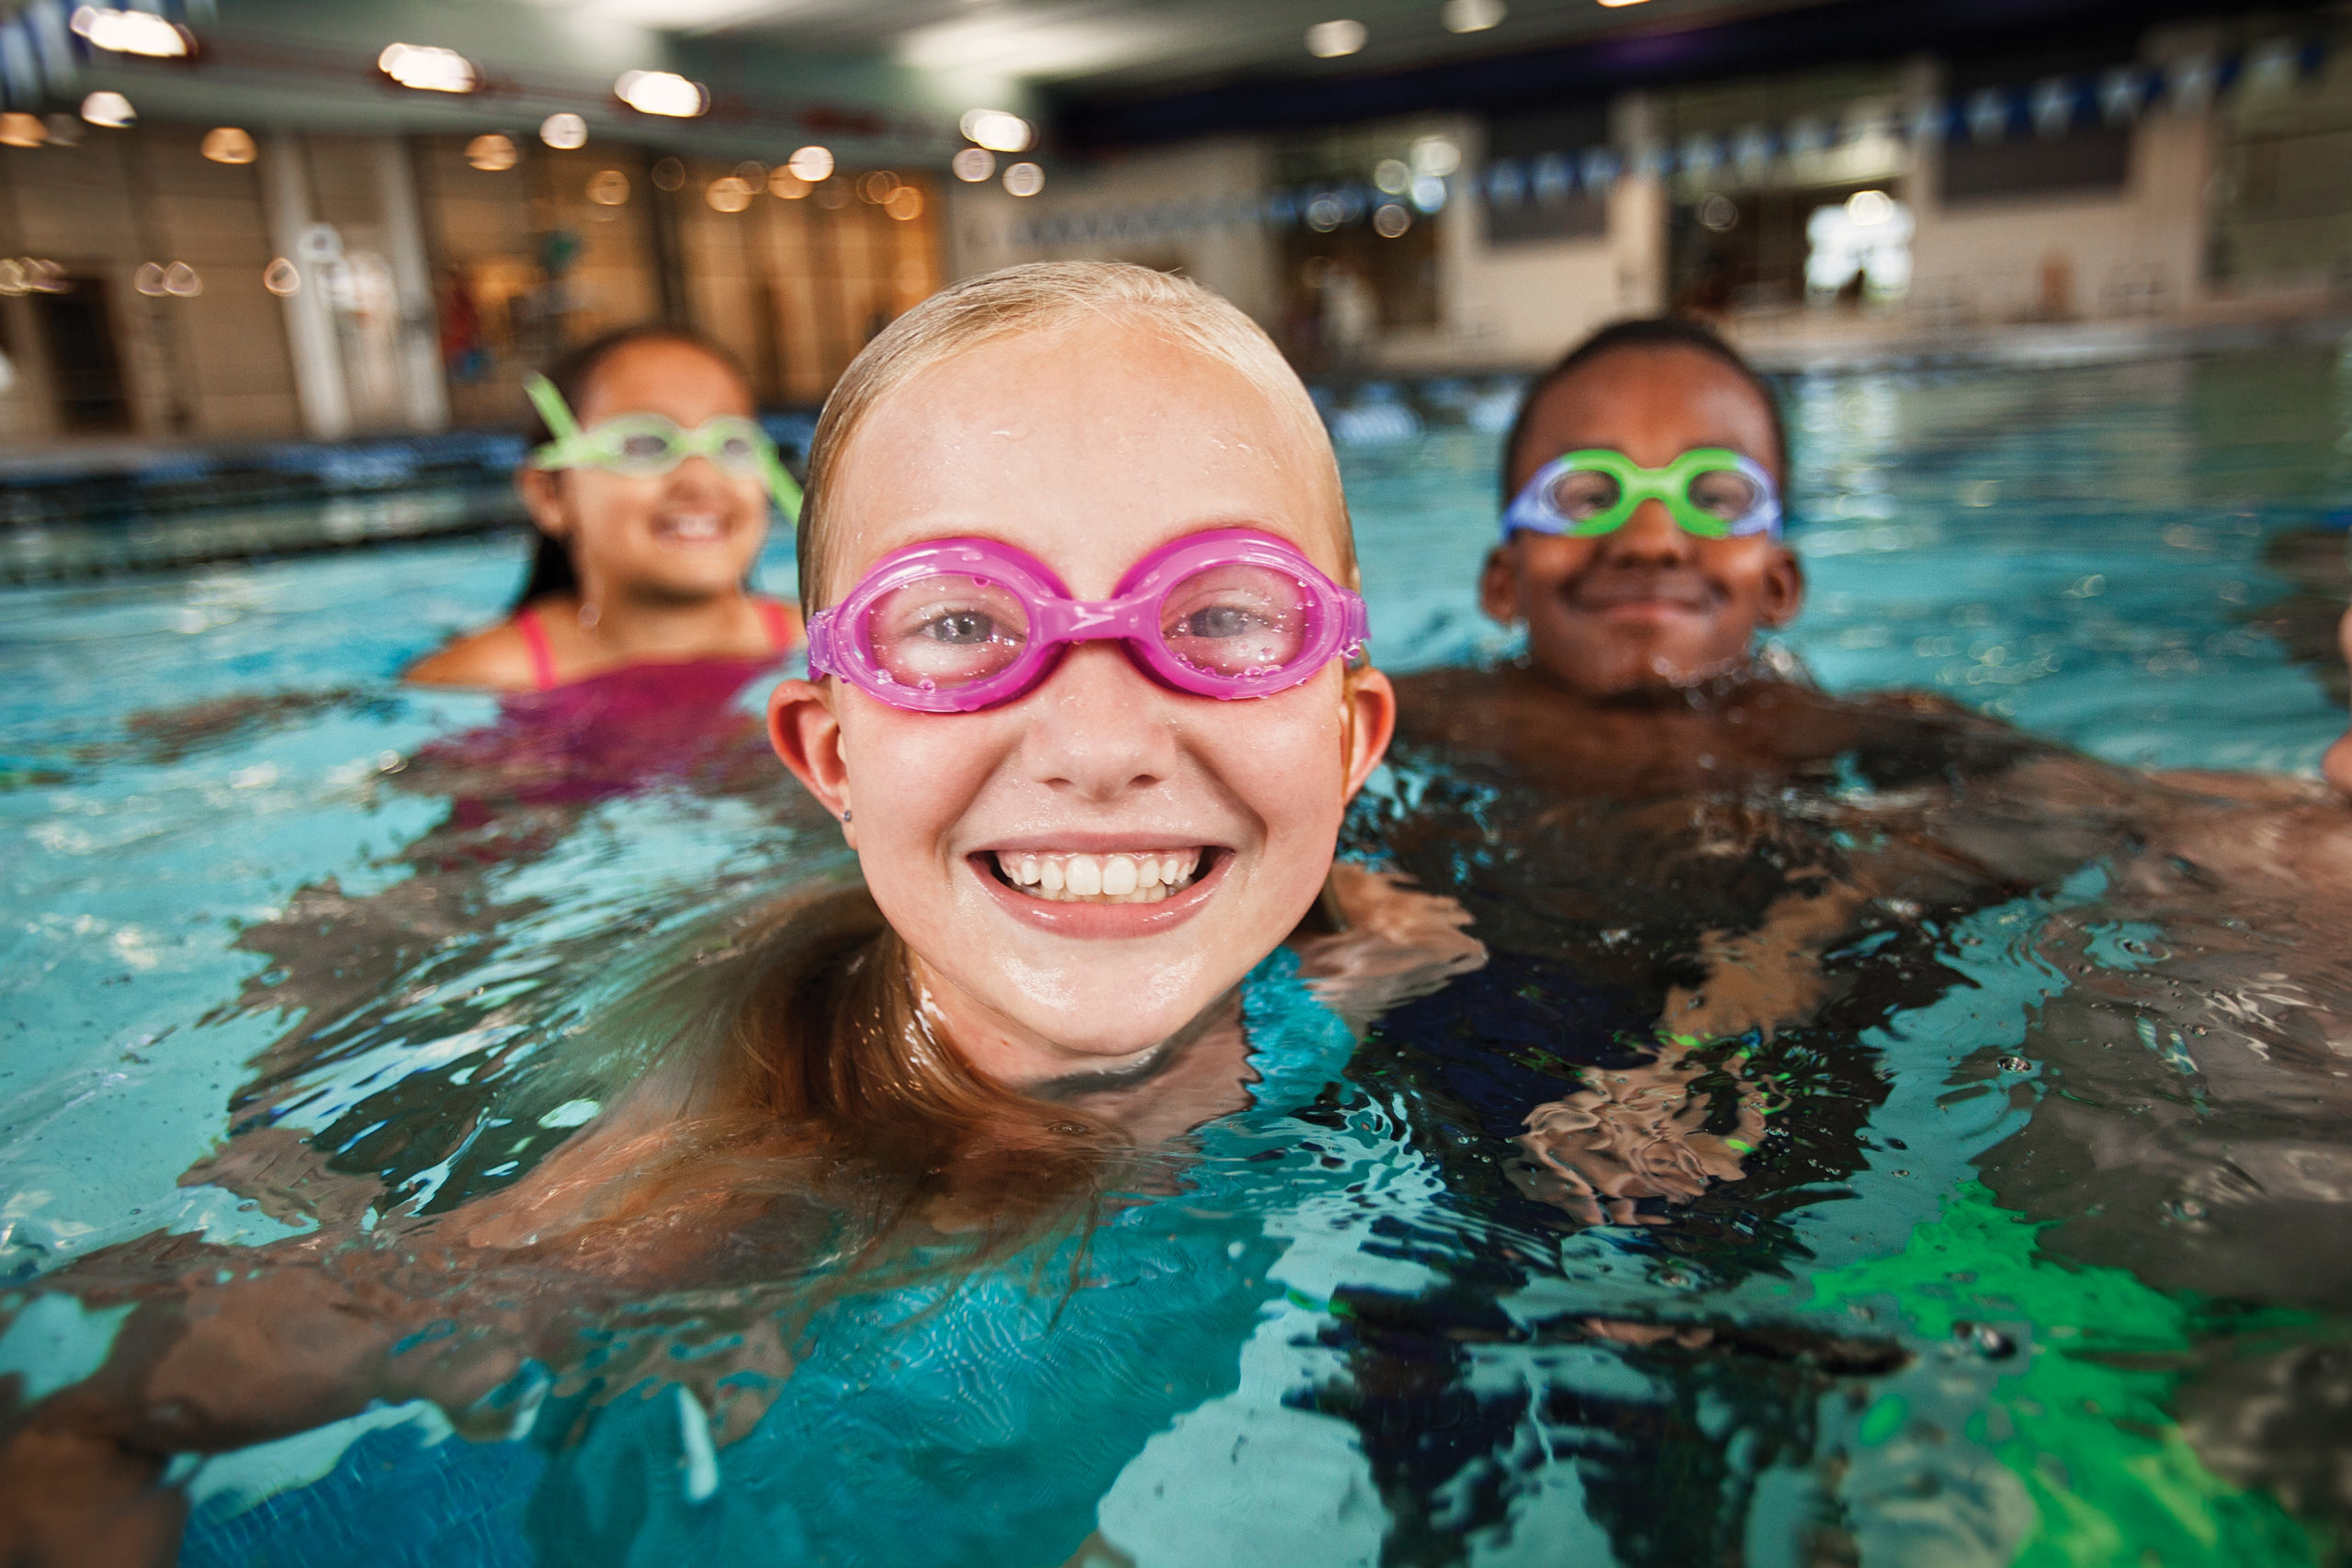 Young children smiling while swimming with goggles on.